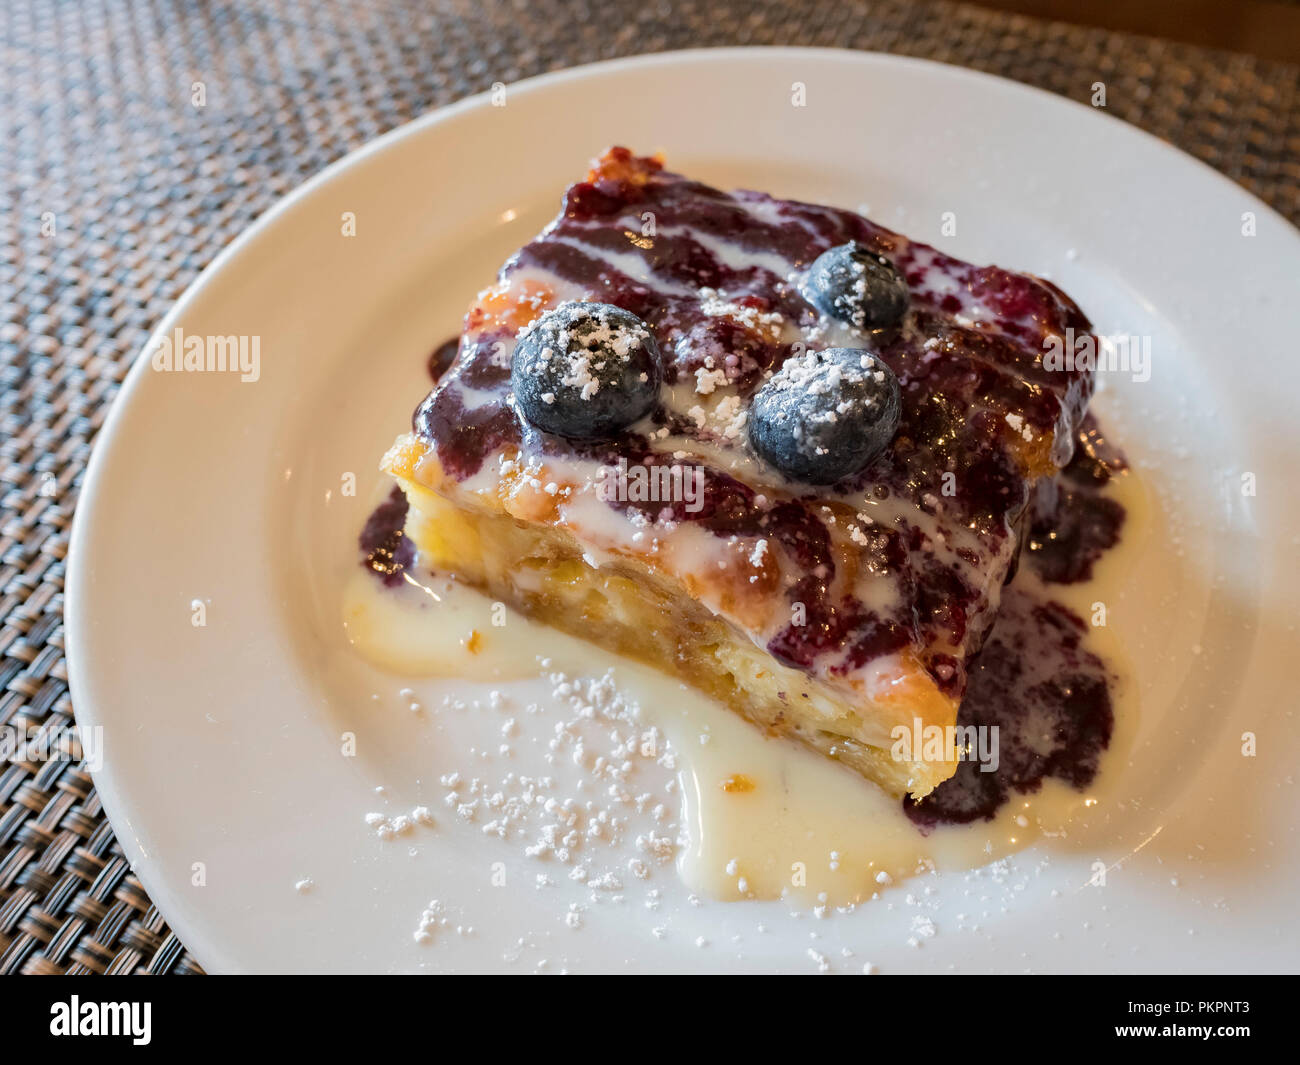 Close up shot of blueberry bread pudding with condensed milk, ate ...